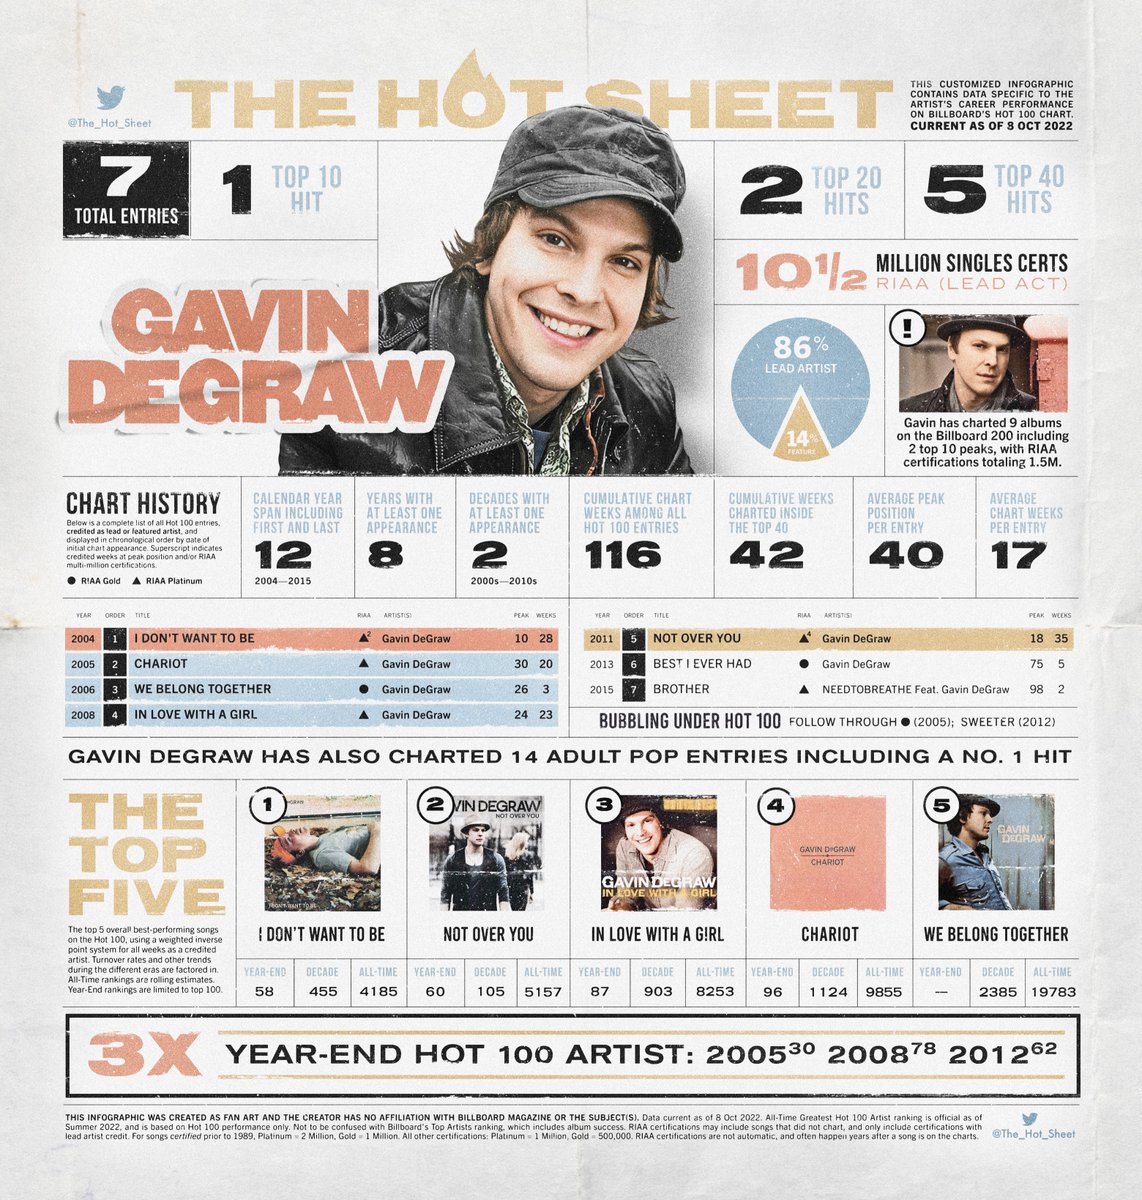 The Hot Sheet : GAVIN DEGRAW (@GavinDeGraw) : Billboard Hot 100 Chart History : Press/hold image to view in 4K hi-res on smartphones : #GavinDeGraw